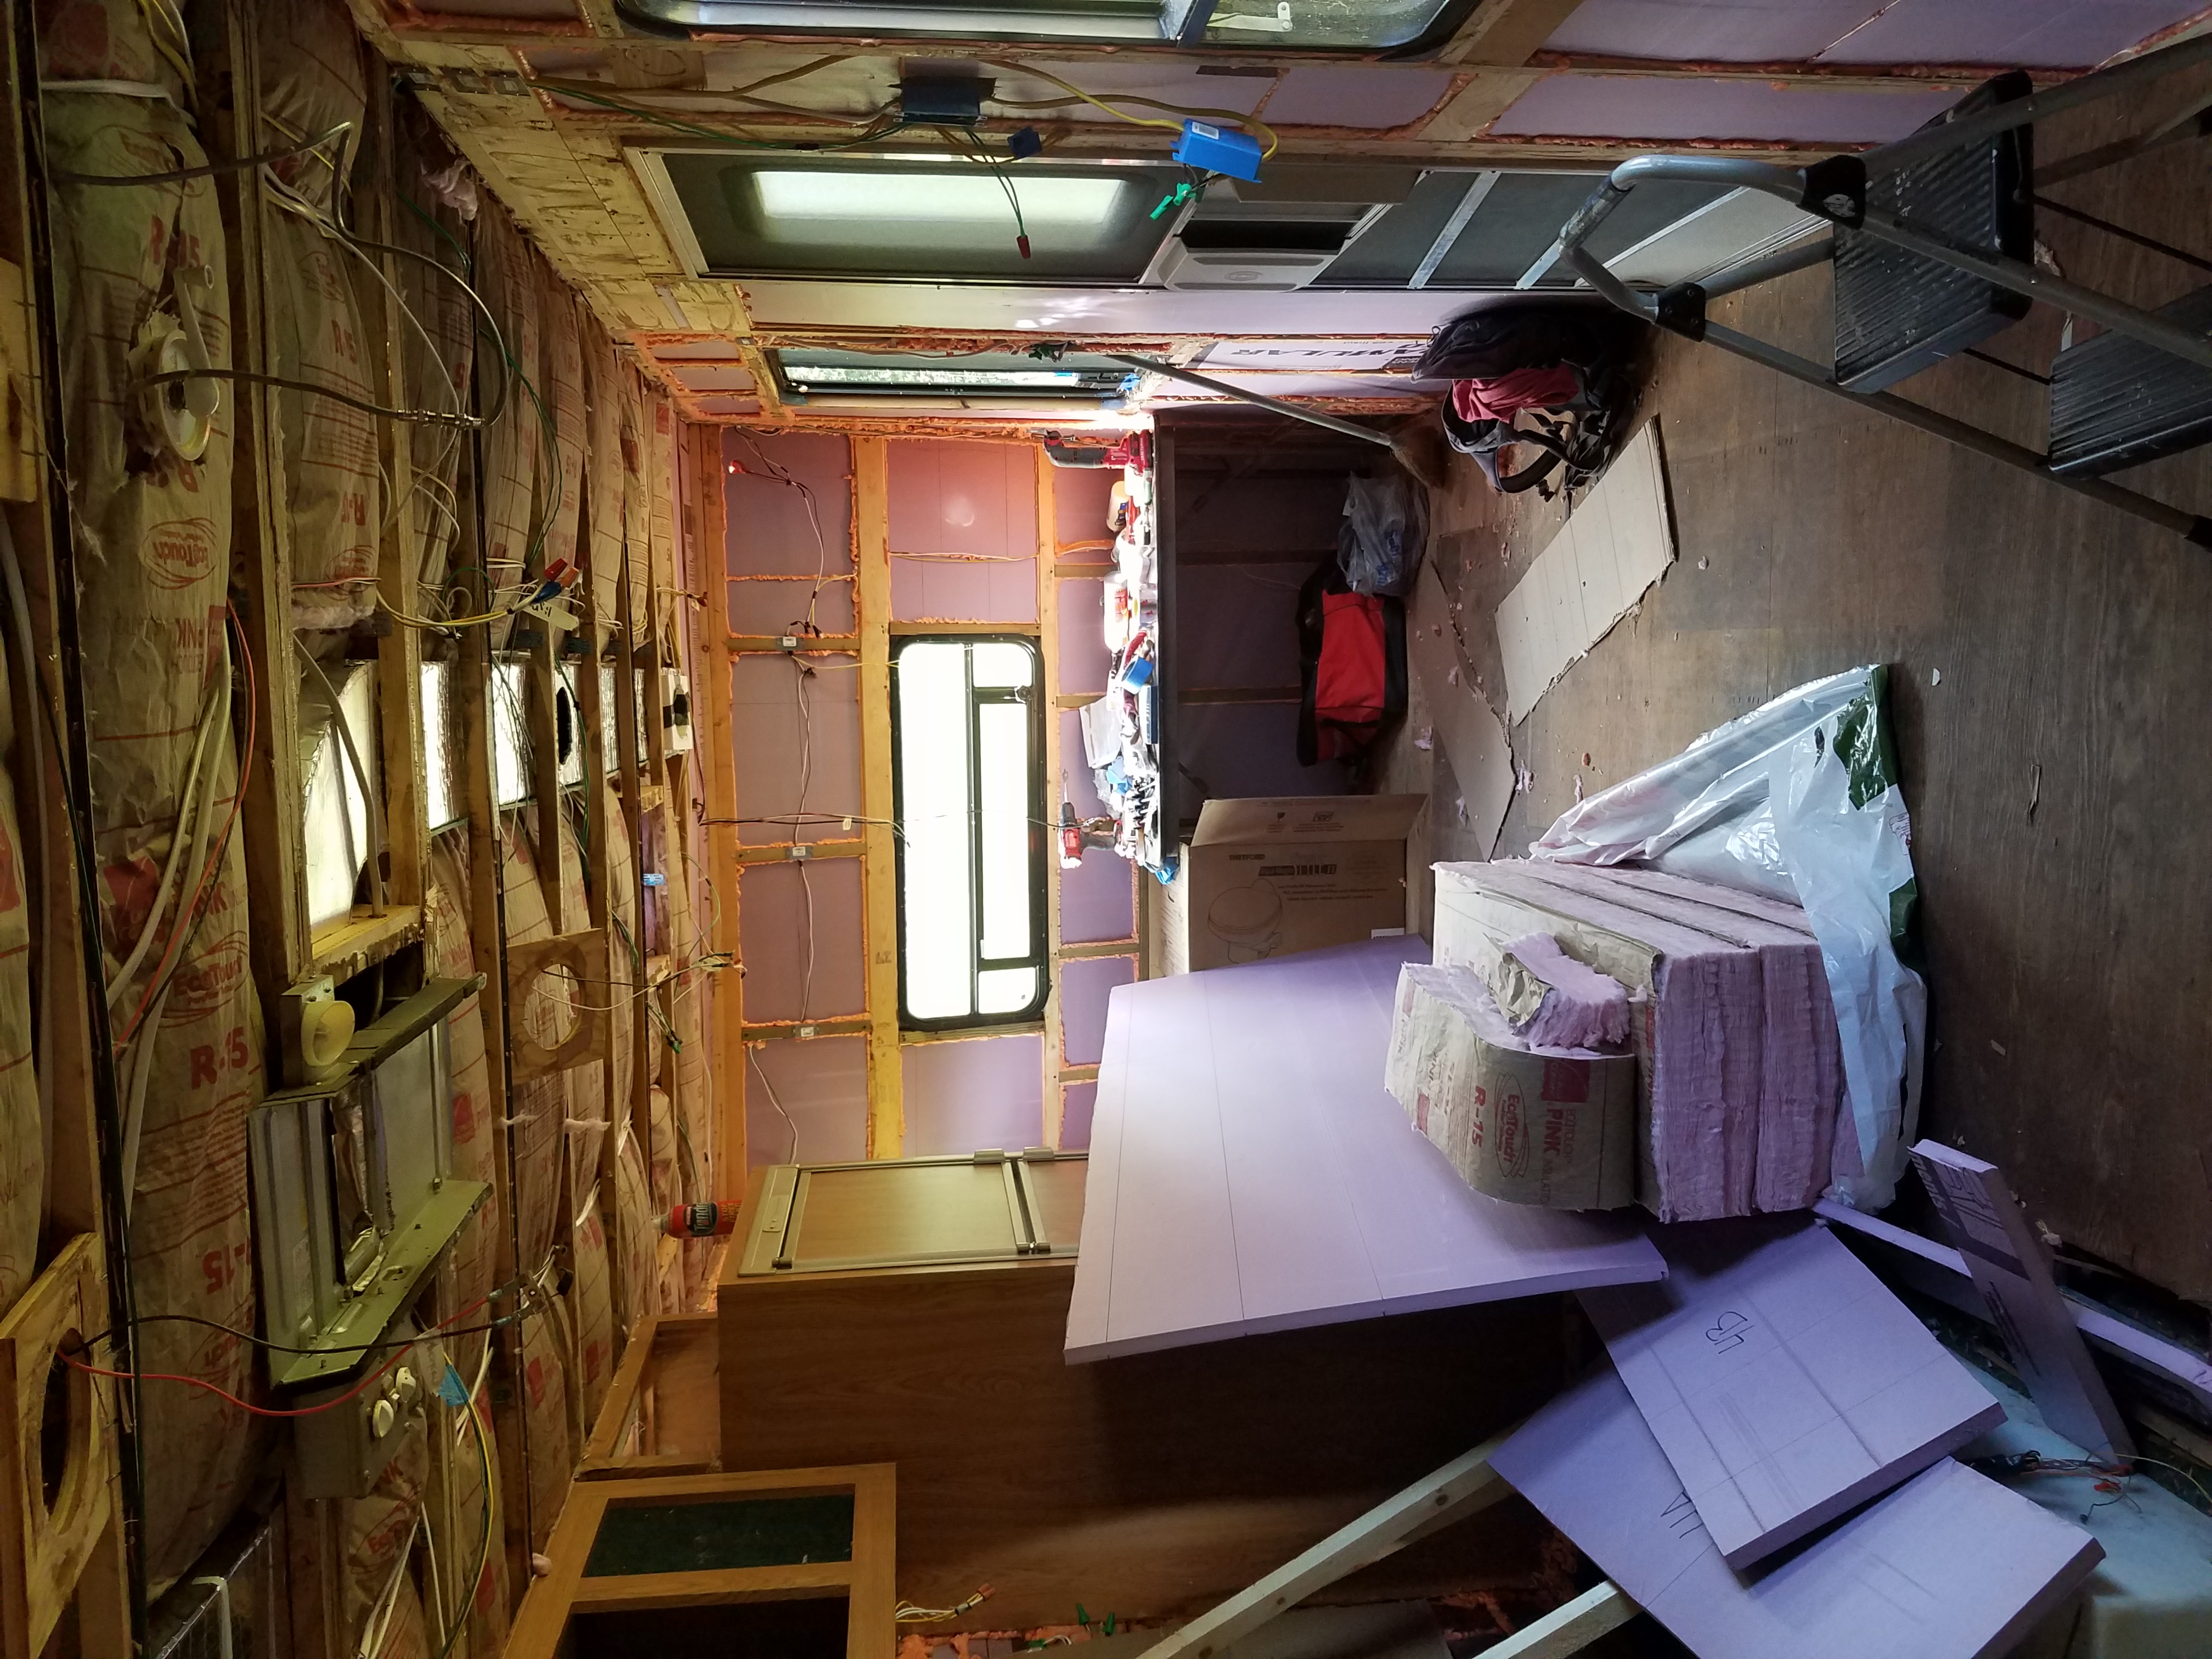 Interior of the travel trailer with insulation visible in the walls and ceiling.